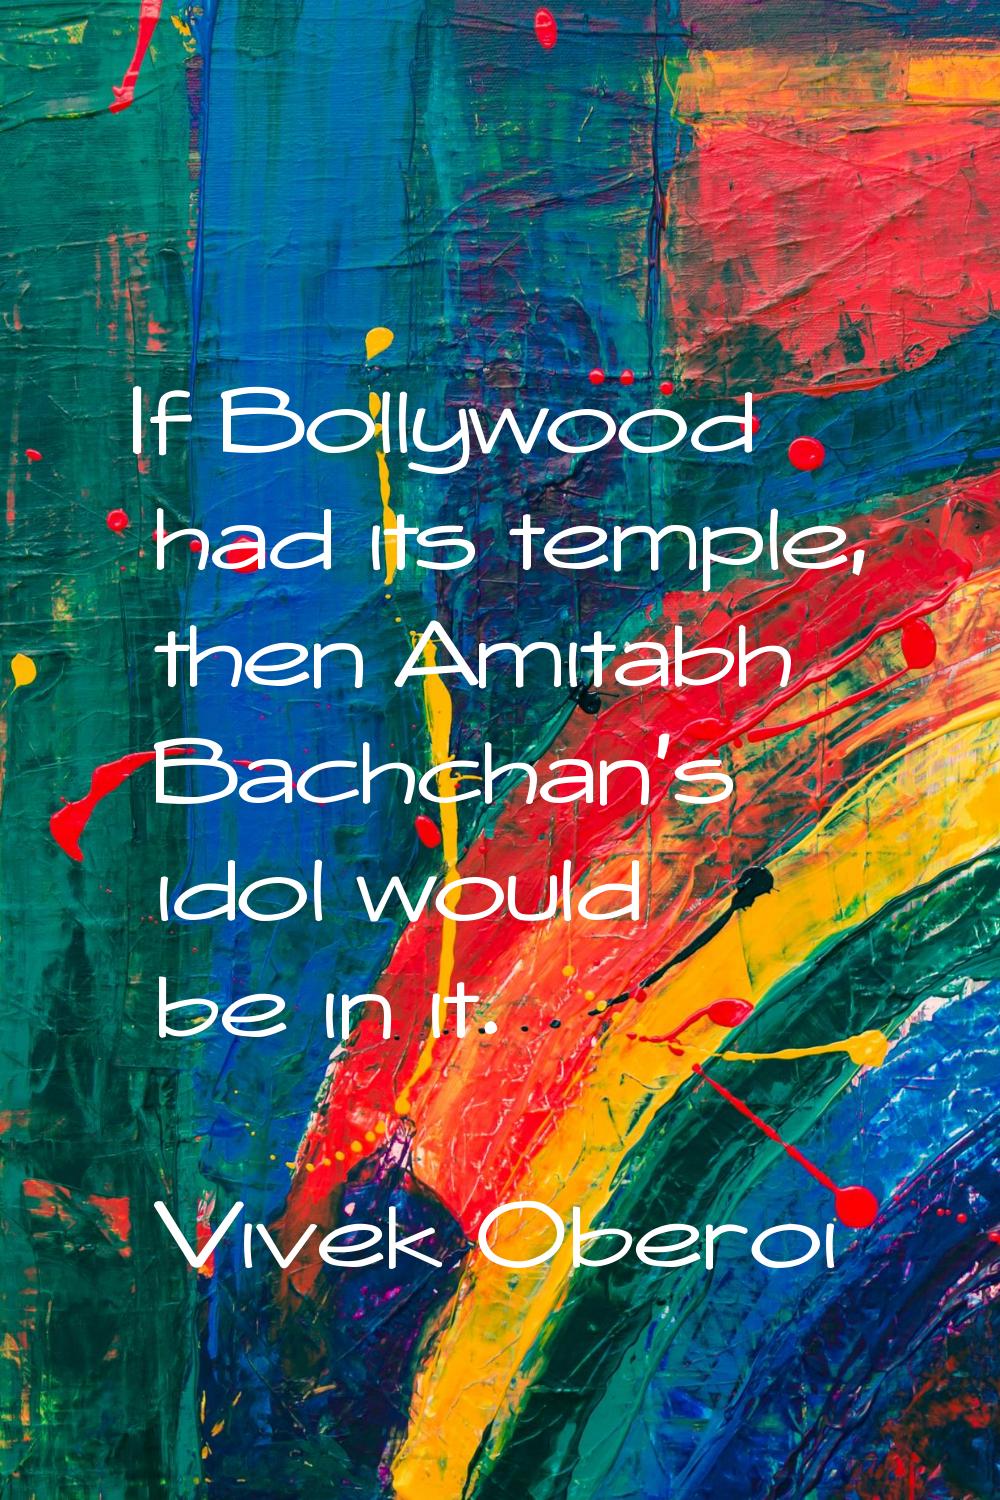 If Bollywood had its temple, then Amitabh Bachchan's idol would be in it.